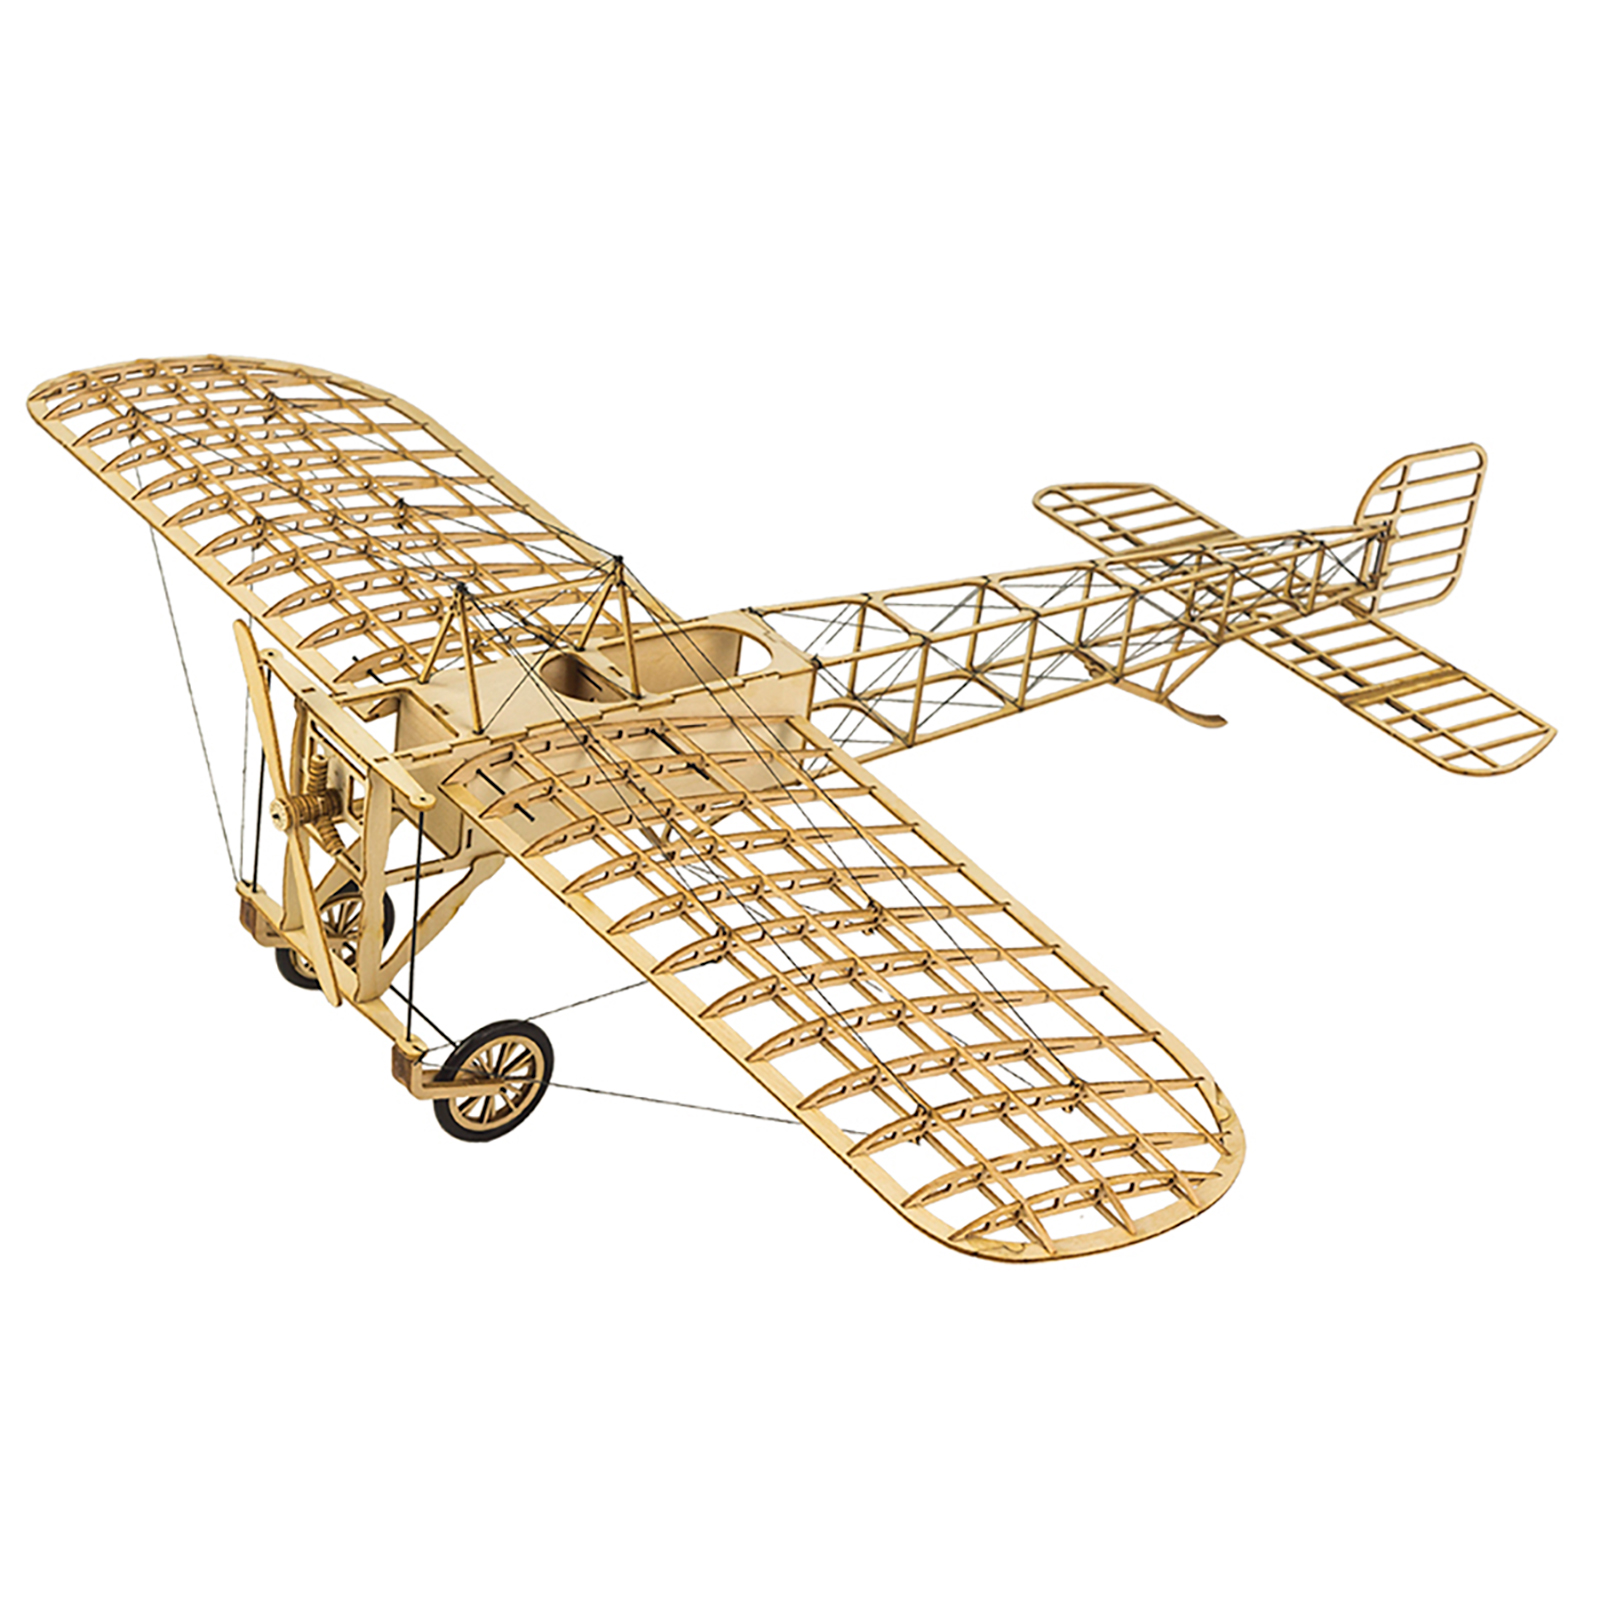 DWH VX14 1:23 Scale 380mm Wingspan Airplane Wooden DIY Building Model Bleriot XI Aeroplane 3D Puzzles DIY Aircraft Kit Toy